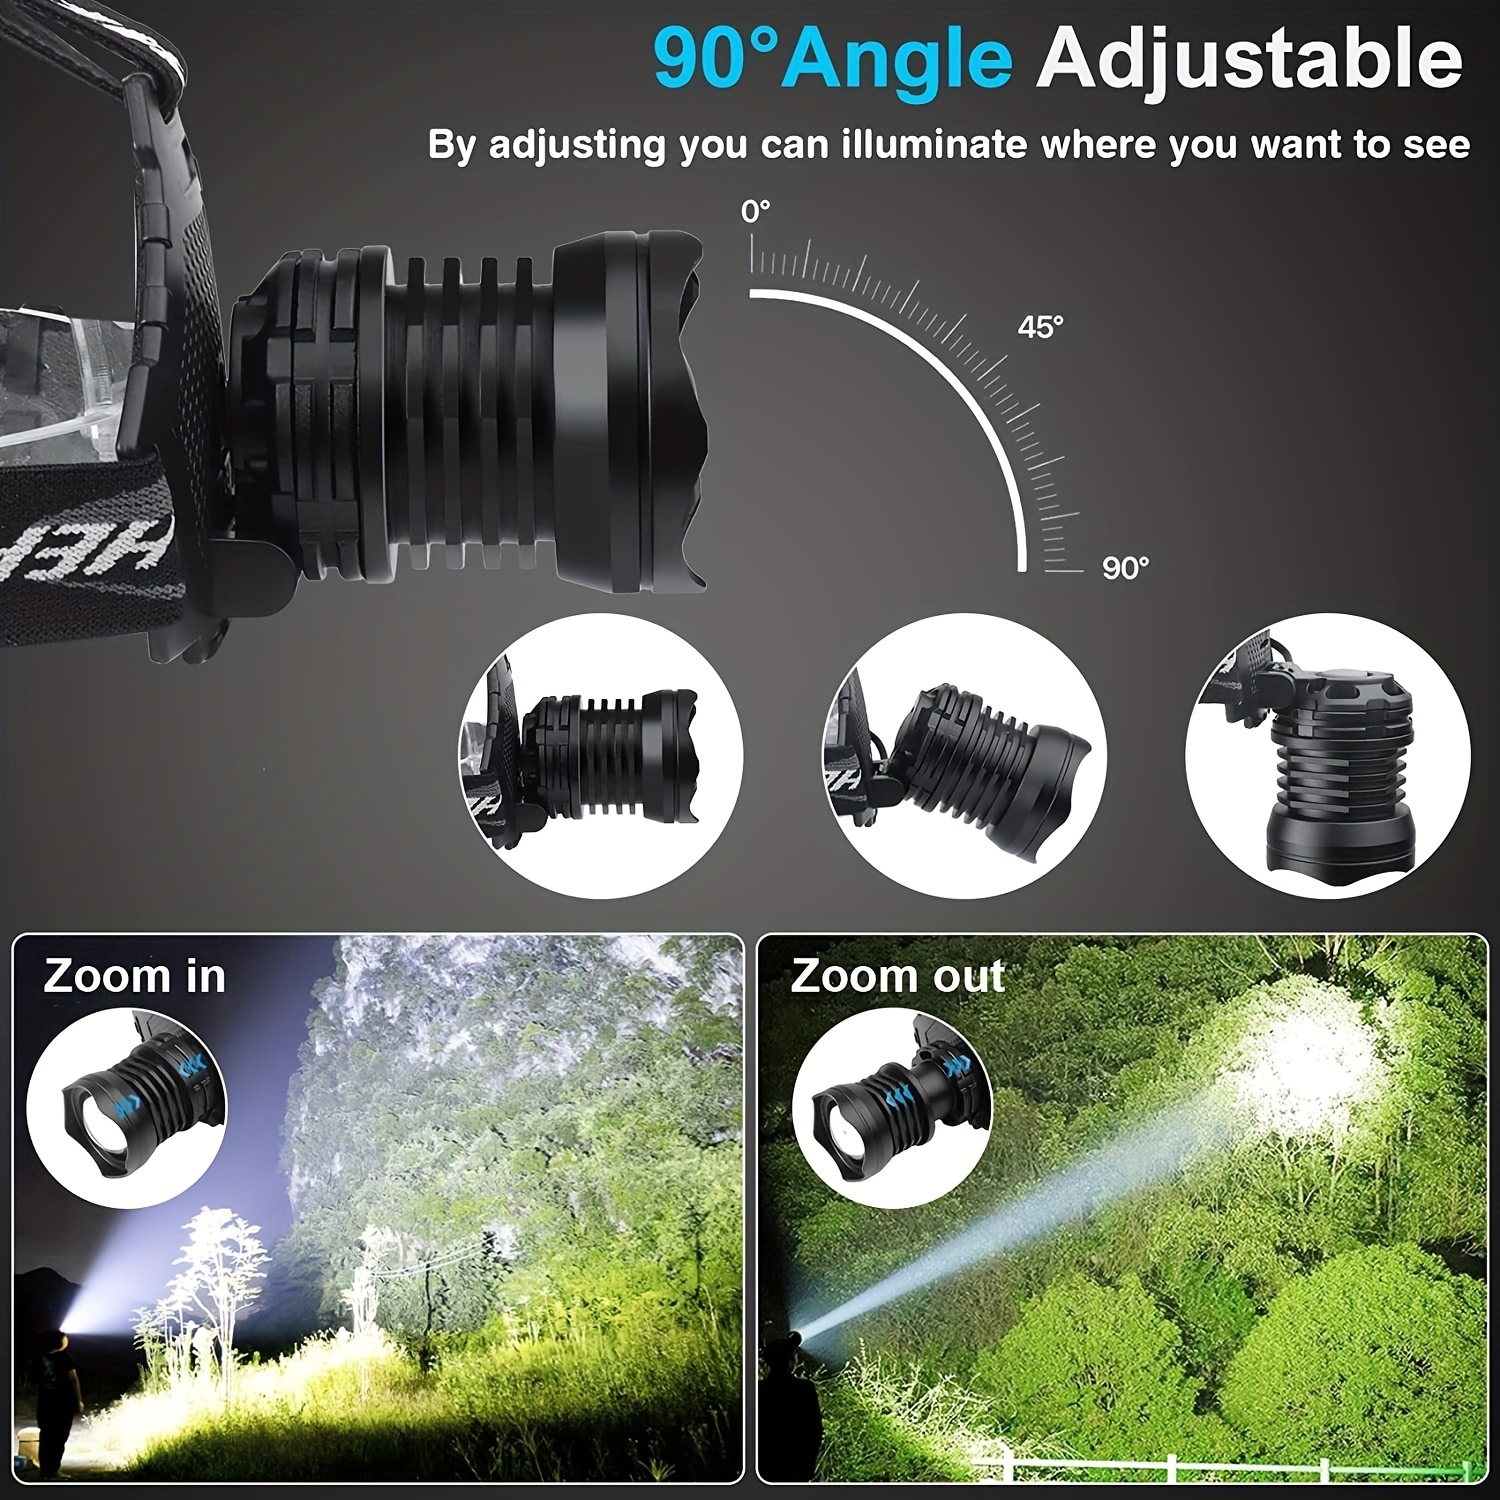 Ultrabright Led Head Lamp: 9000 High Lumen, Modes, Usb Rechargeable,  Waterproof, Perfect For Camping, Hunting, Running, Cycling  Outdoor  Activities! Temu